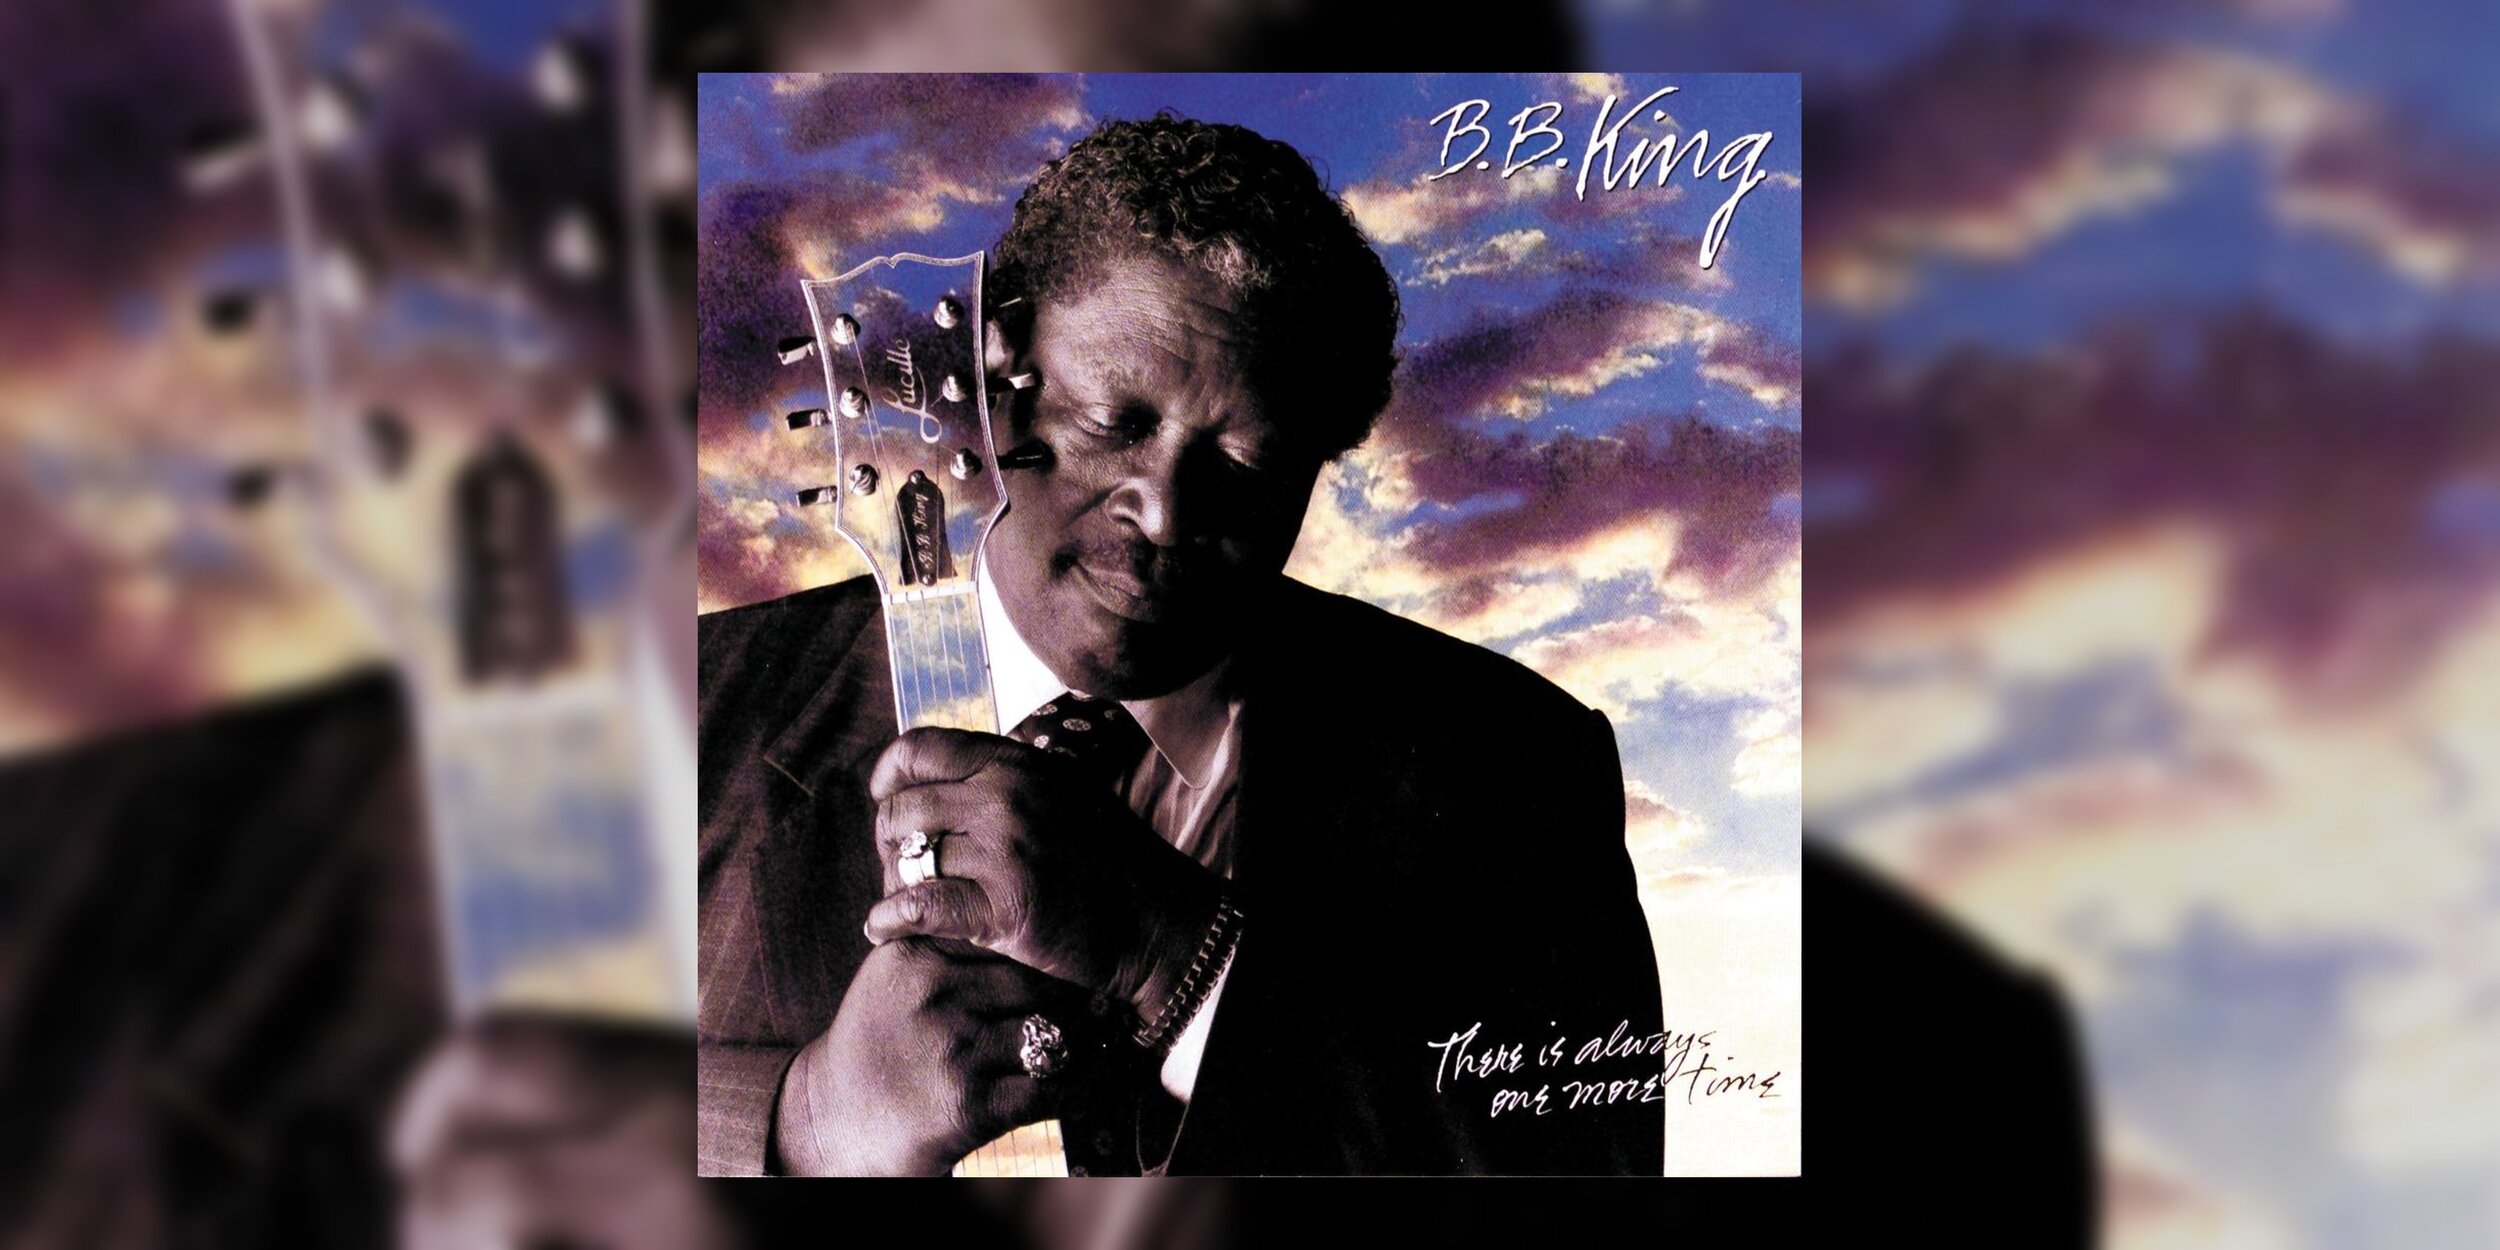 Revisit & Listen to B.B. King's 'There Is Always One More Time